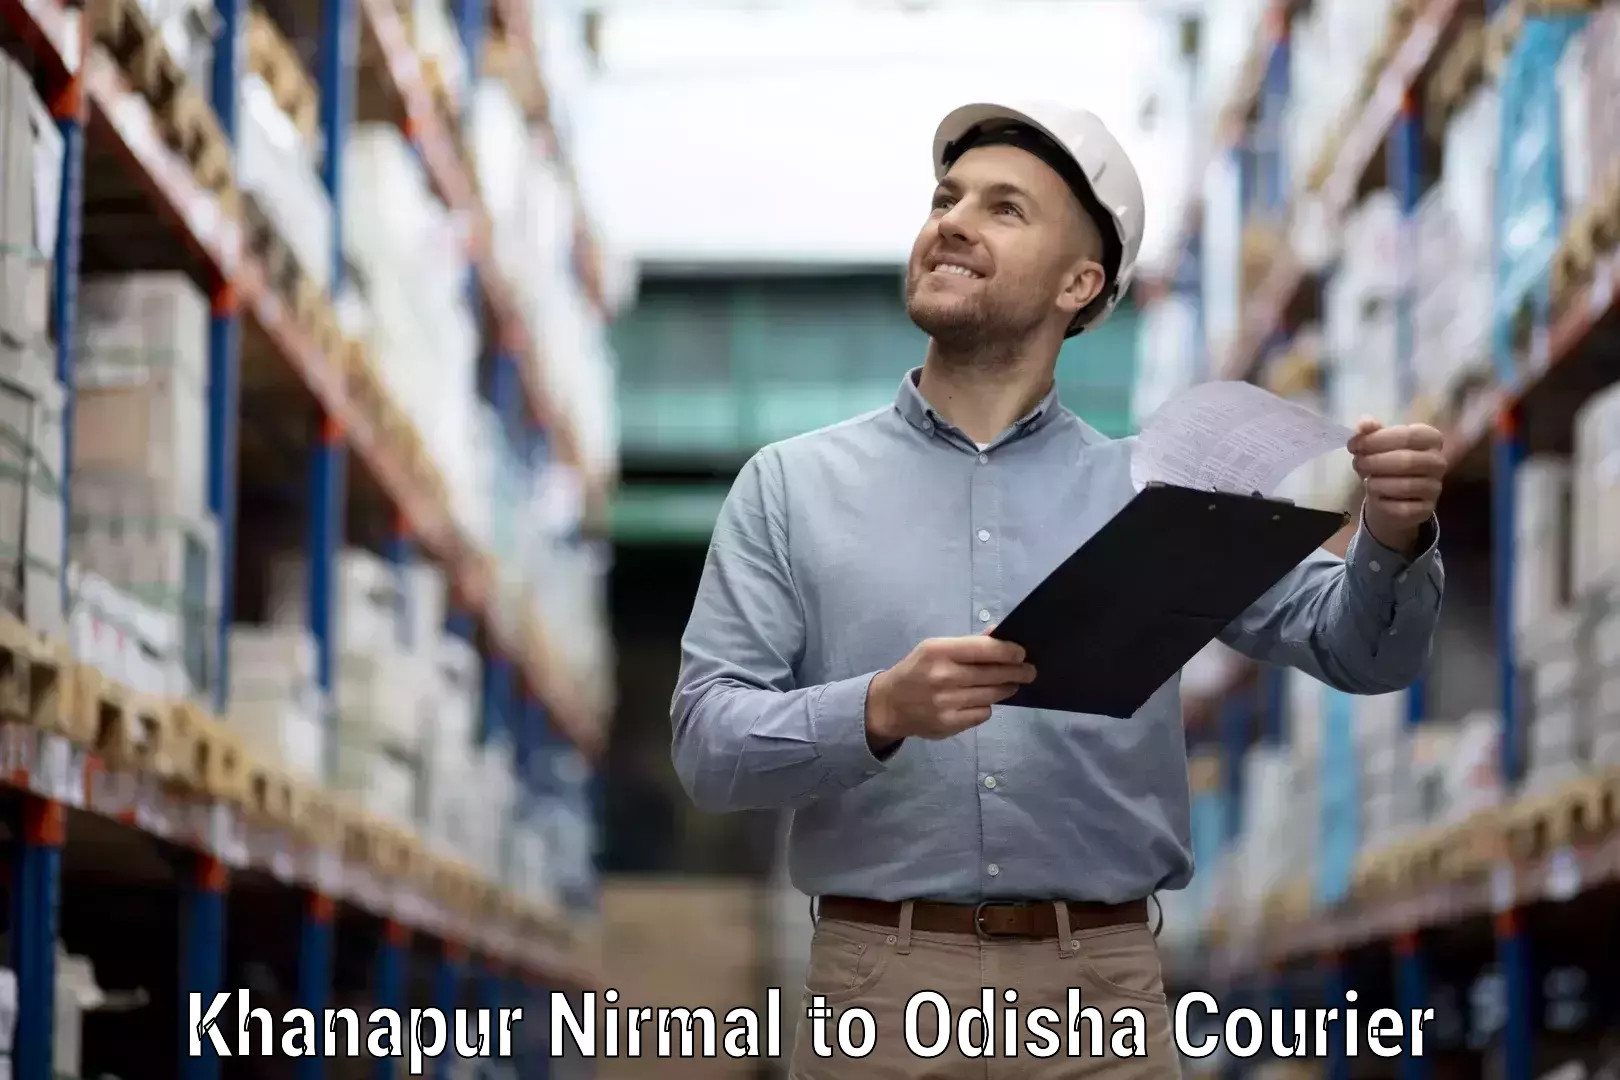 Large package courier Khanapur Nirmal to Puri